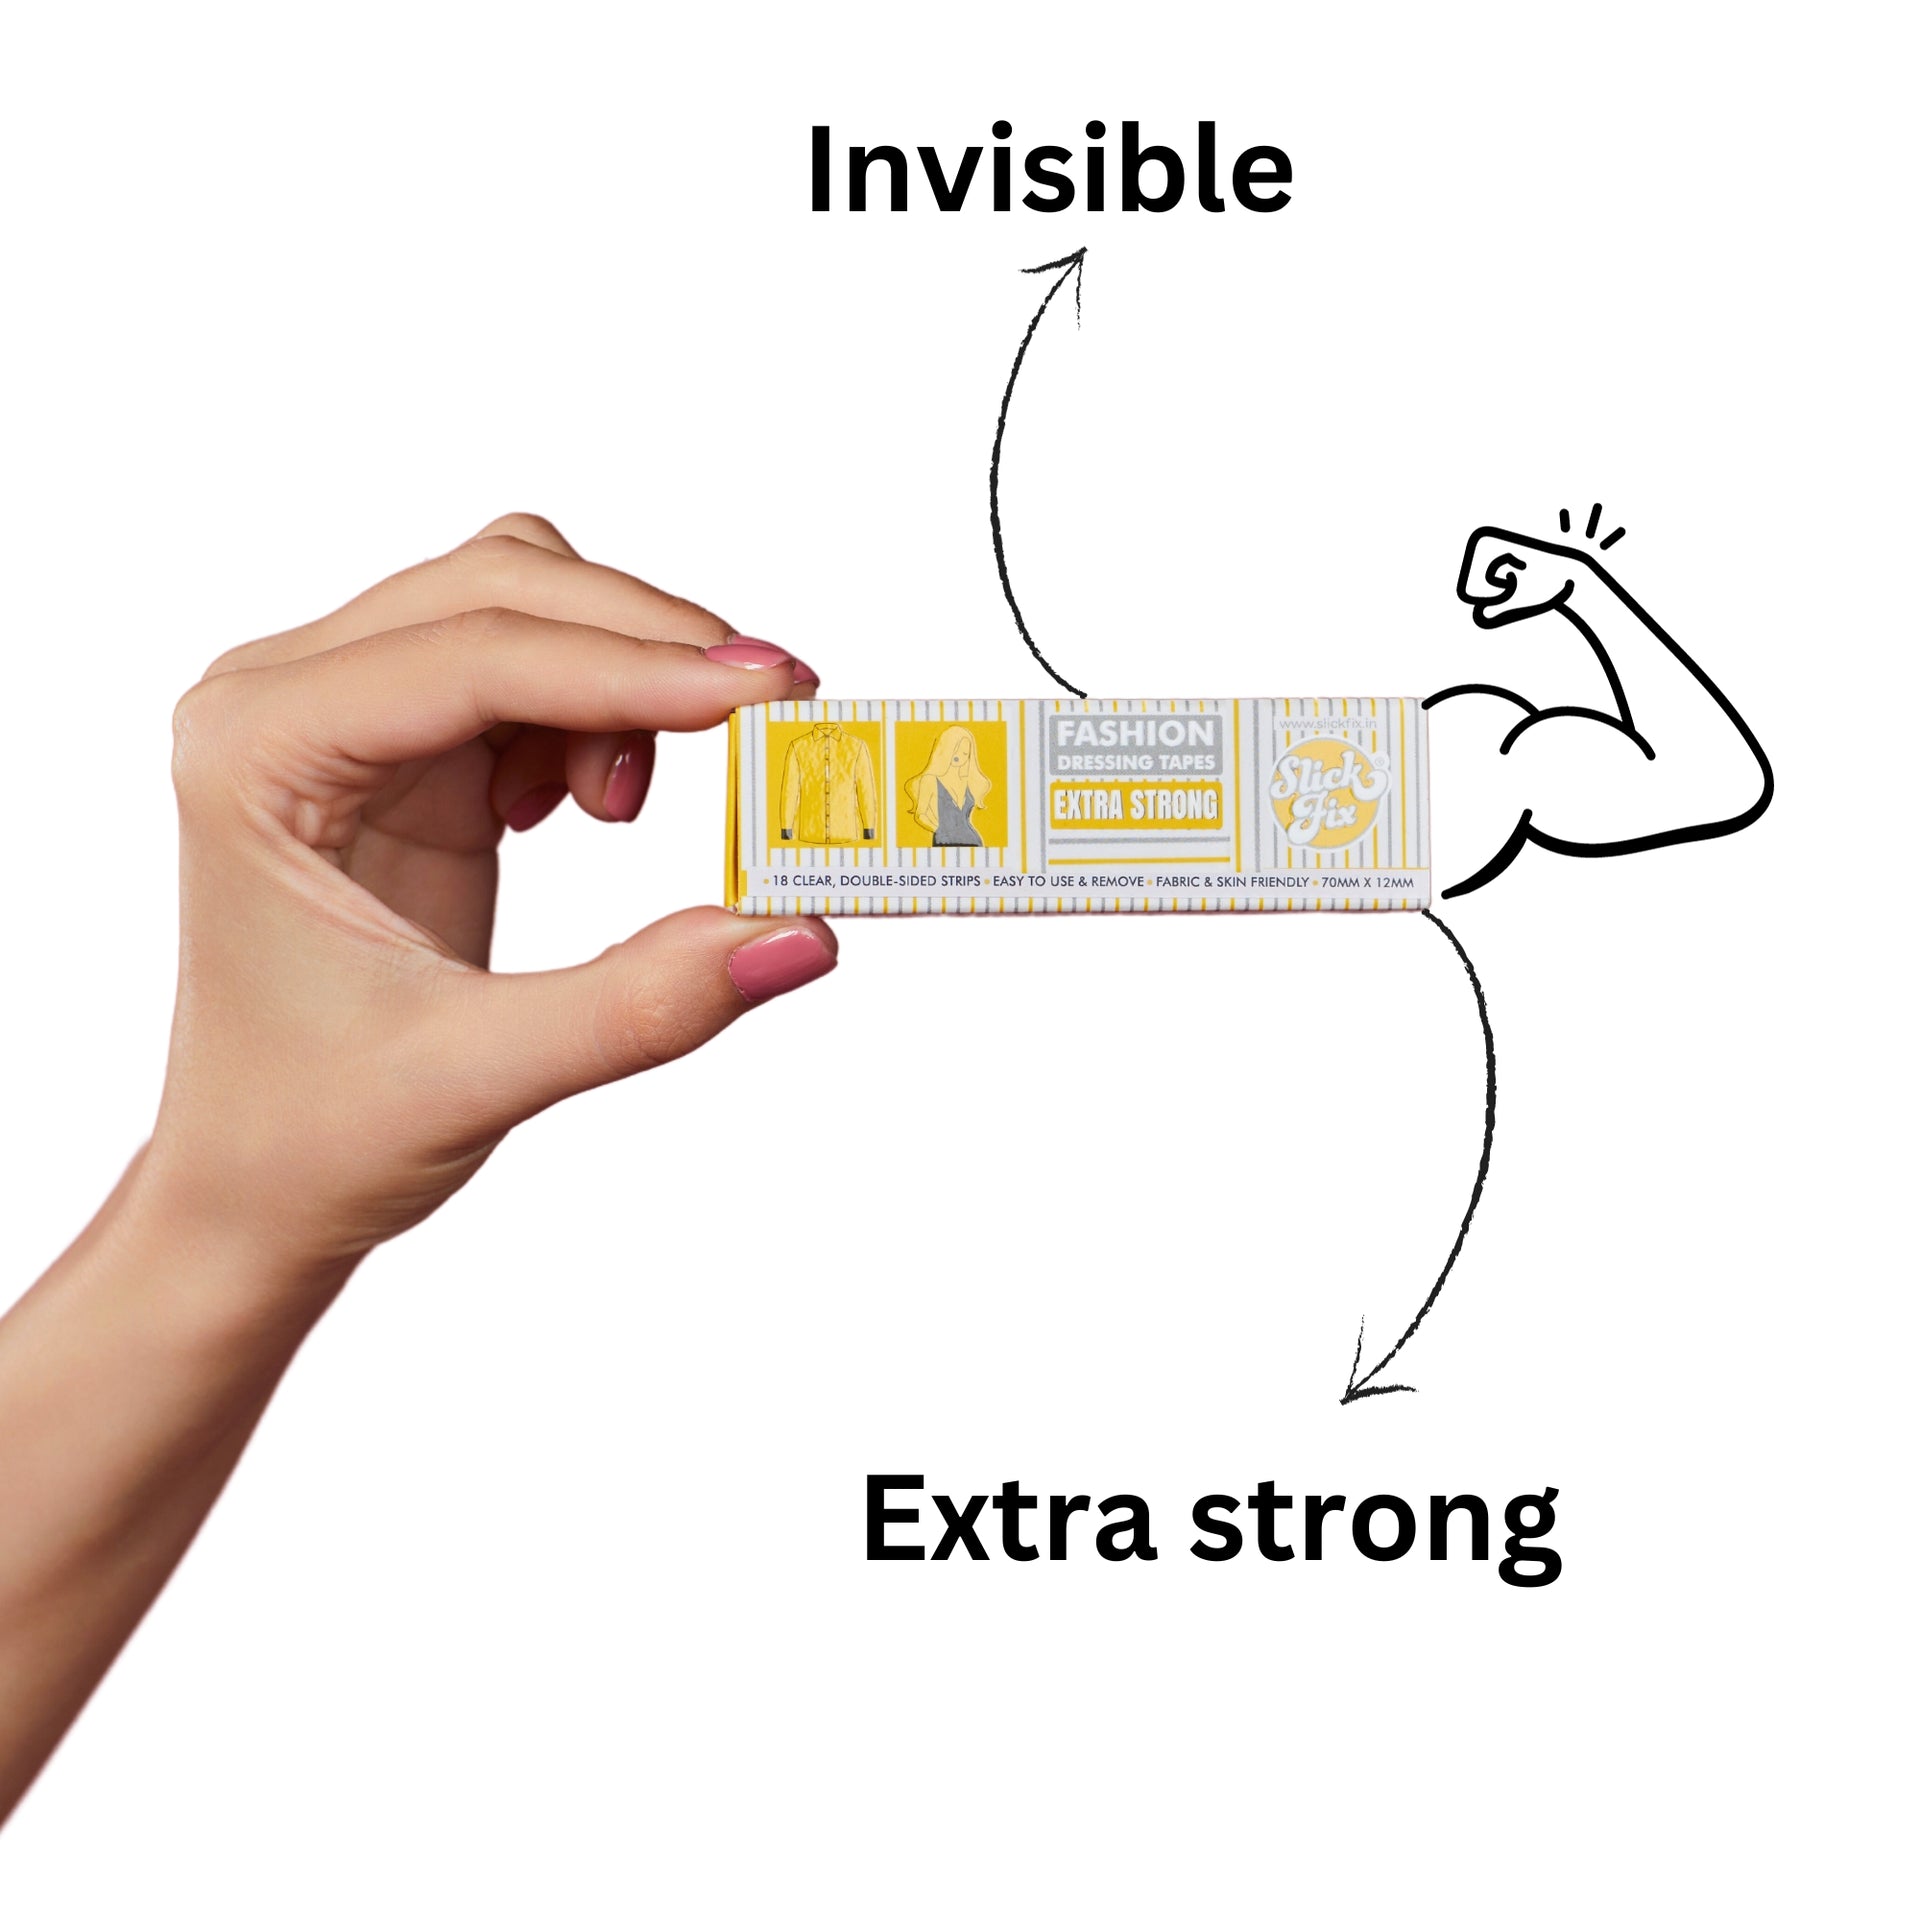 SlickFix Fashion Dressing Tape  Invisible, Strong, and Versatile – Slickfix